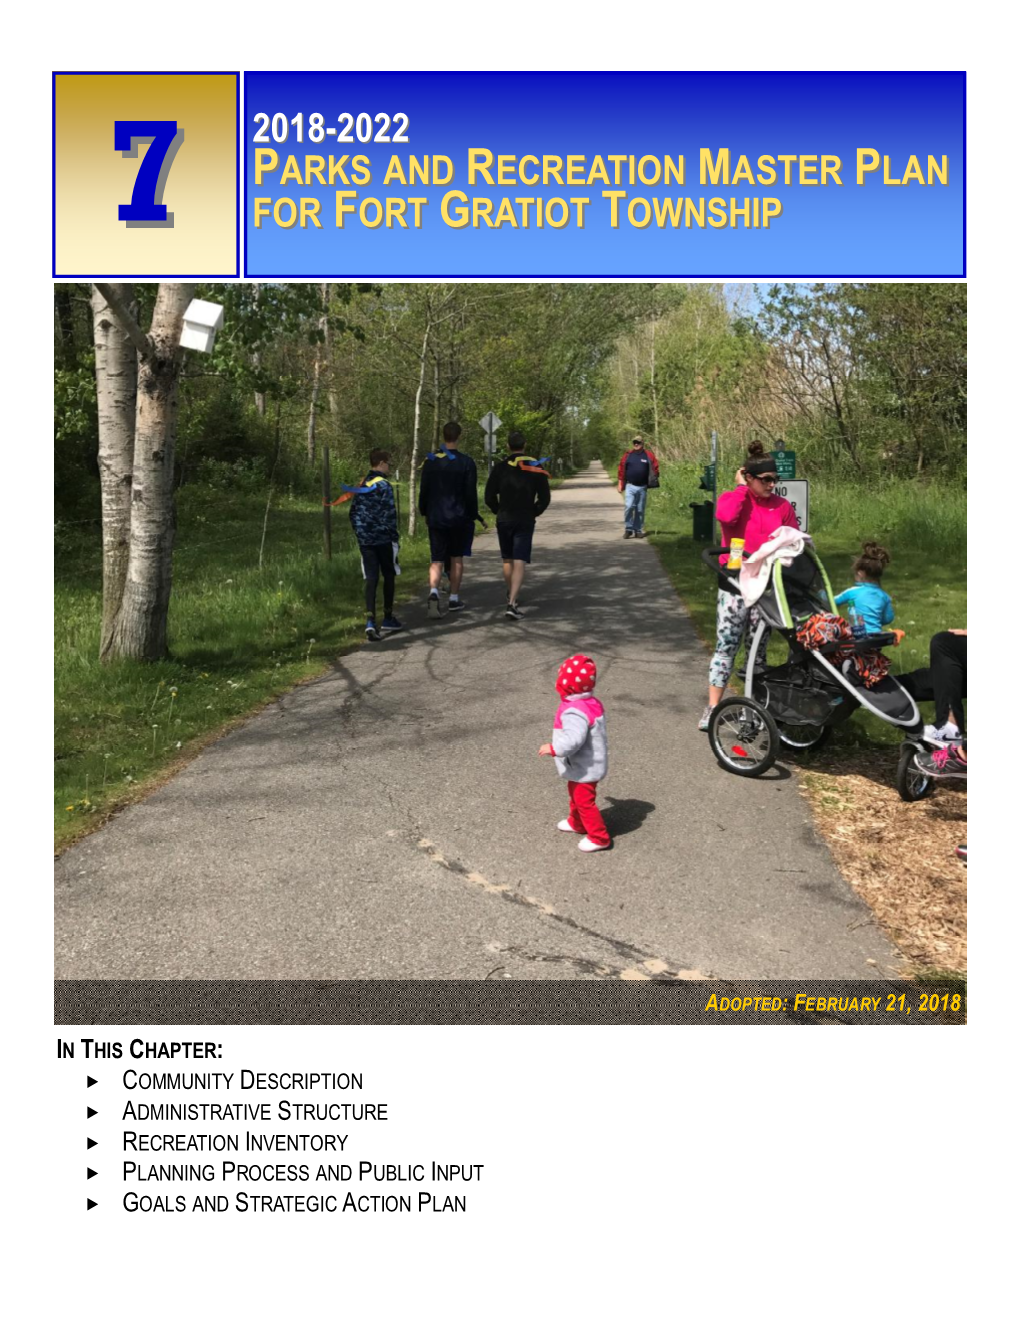 2018-2022 Parks and Recreation Master Plan for Fort Gratiot Township